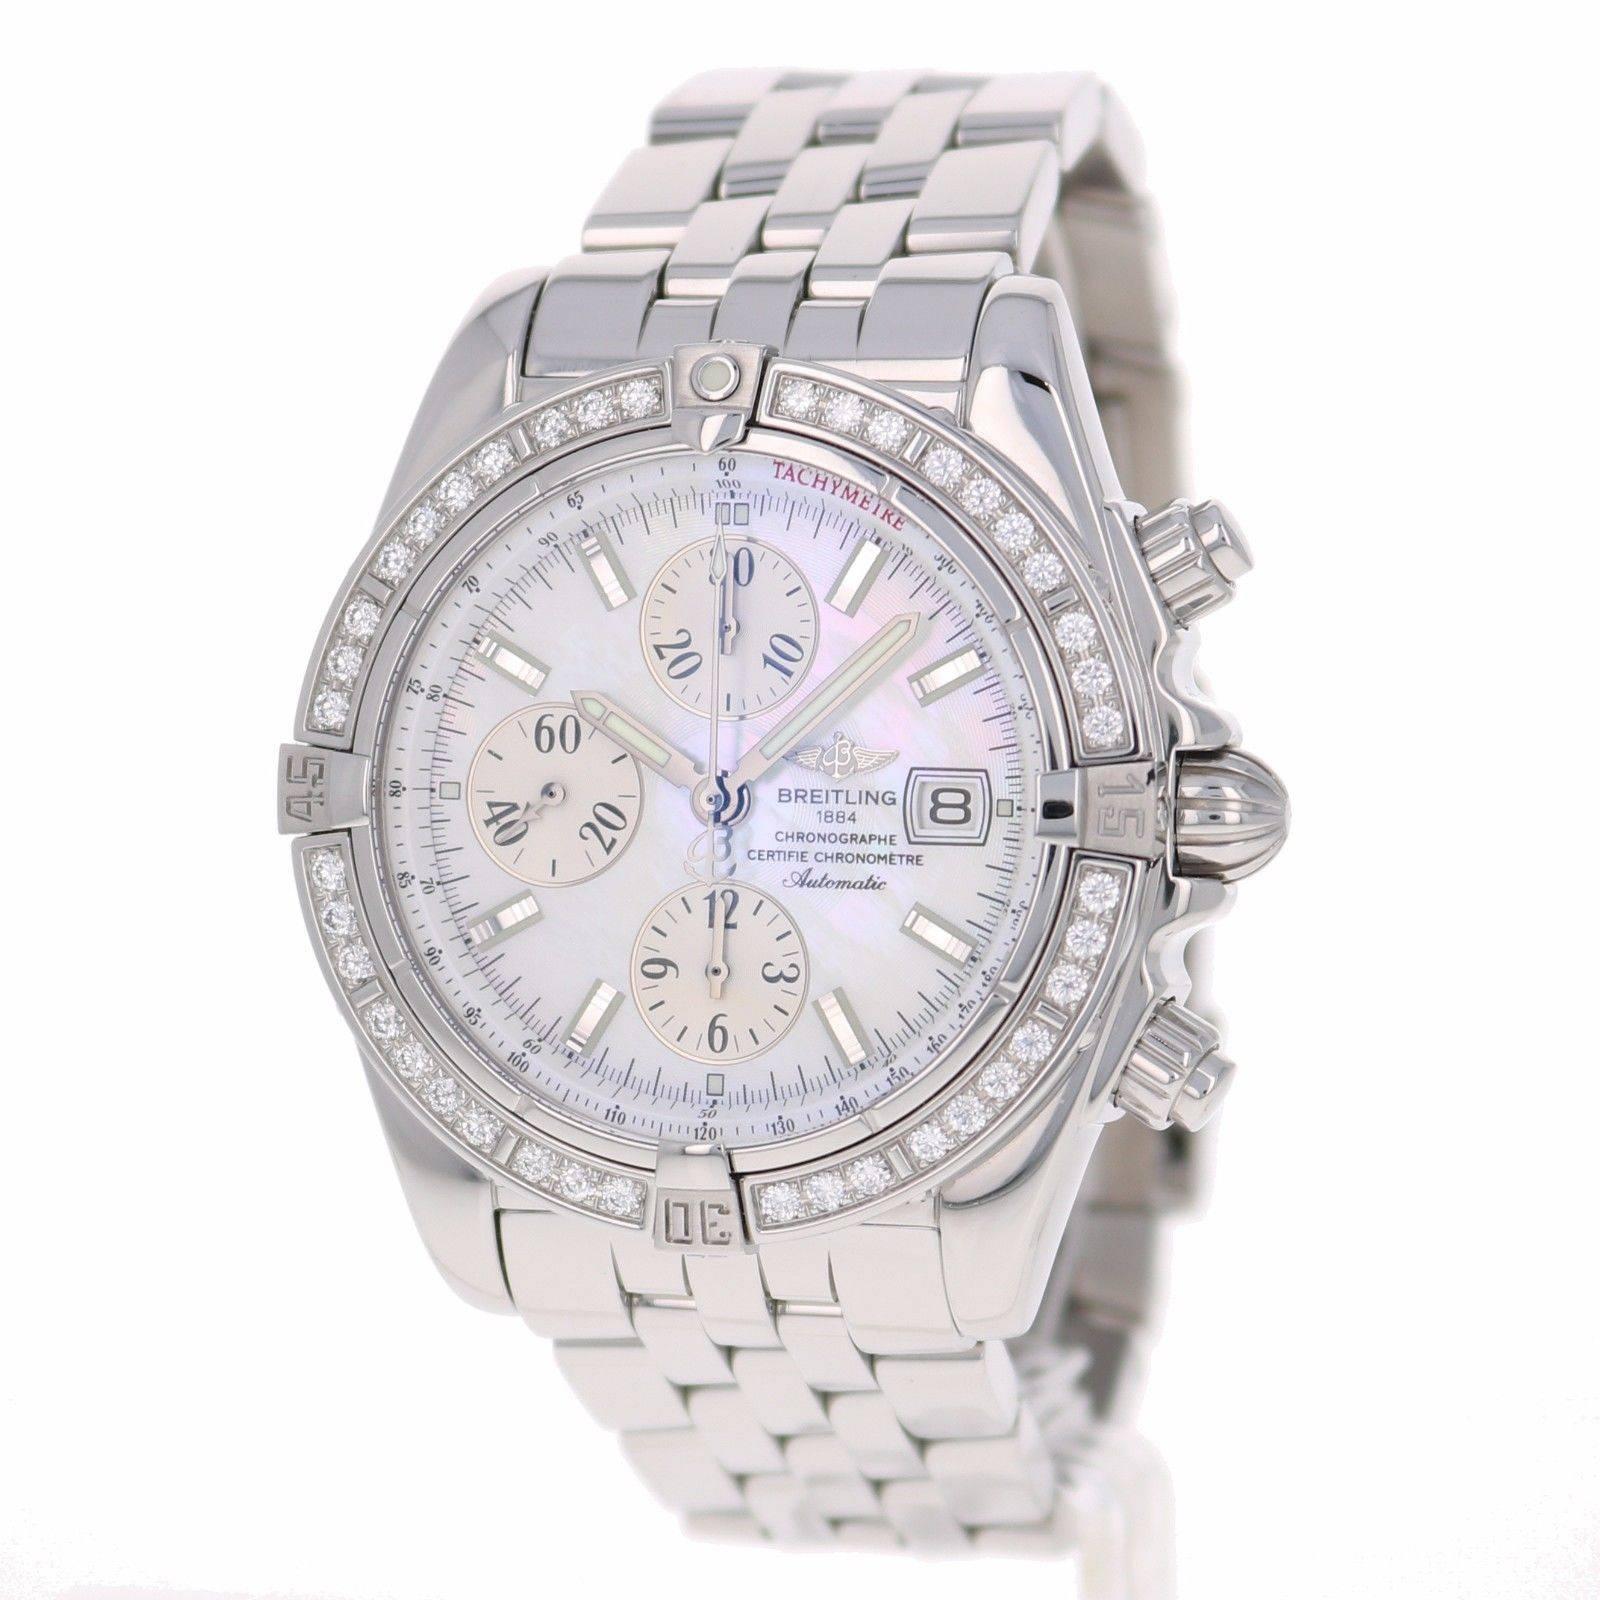 Brand Name: Breitling 
Style Number: A1335653/A569 
Series: Chronomat 
Gender: Men's 
Case Material: Stainless Steel 
Dial Color: Mother of Pearl 
Movement: Automatic 
Engine: Breitling Cal. 13 
Functions: Hours, Minutes, Seconds, Date,